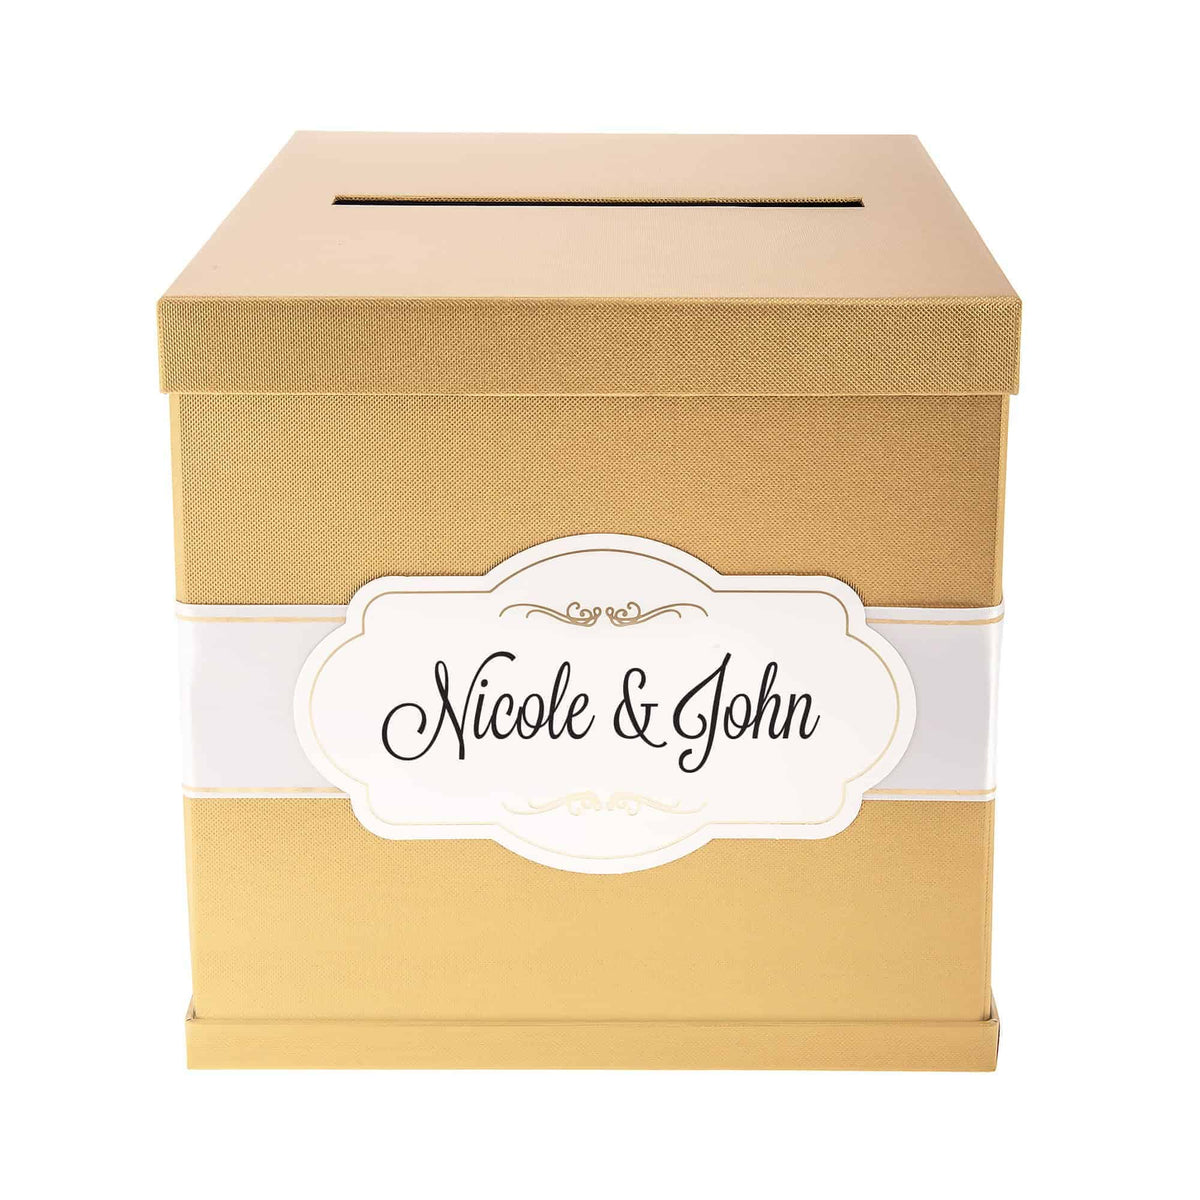 Merry Expressions Gold Card Box with Gold Foil Satin Ribbon & Cards  Label. A Large Card Holder Gift Box Size 10x10x10 